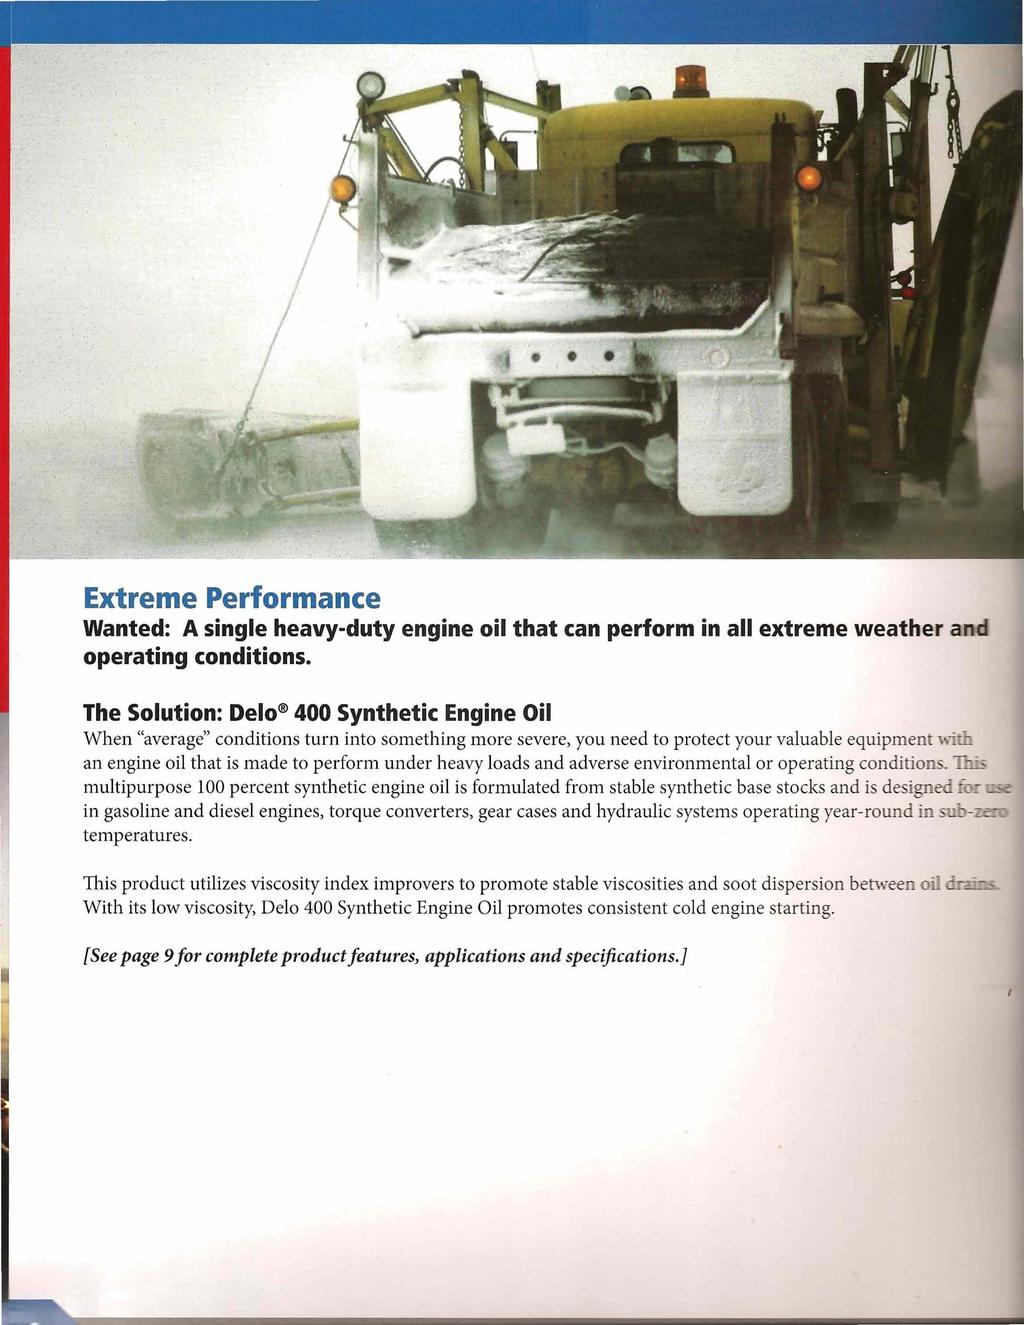 Extreme Performance Wanted: A single heavy-duty engine oil that can perform in all extreme weather operating conditions.